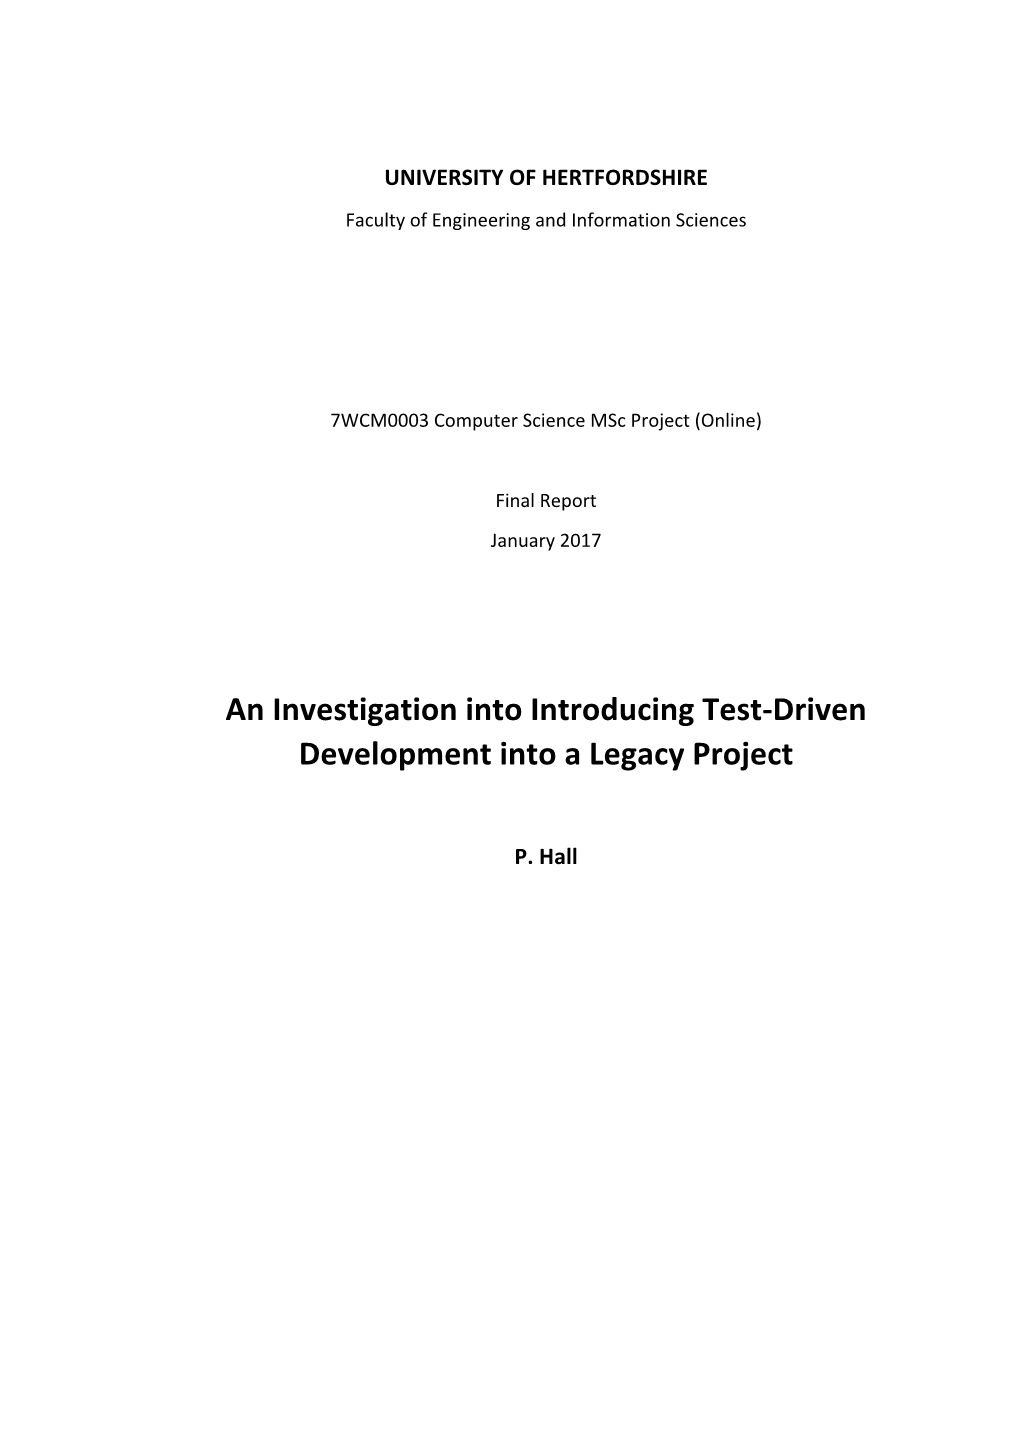 An Investigation Into Introducing Test-Driven Development Into a Legacy Project